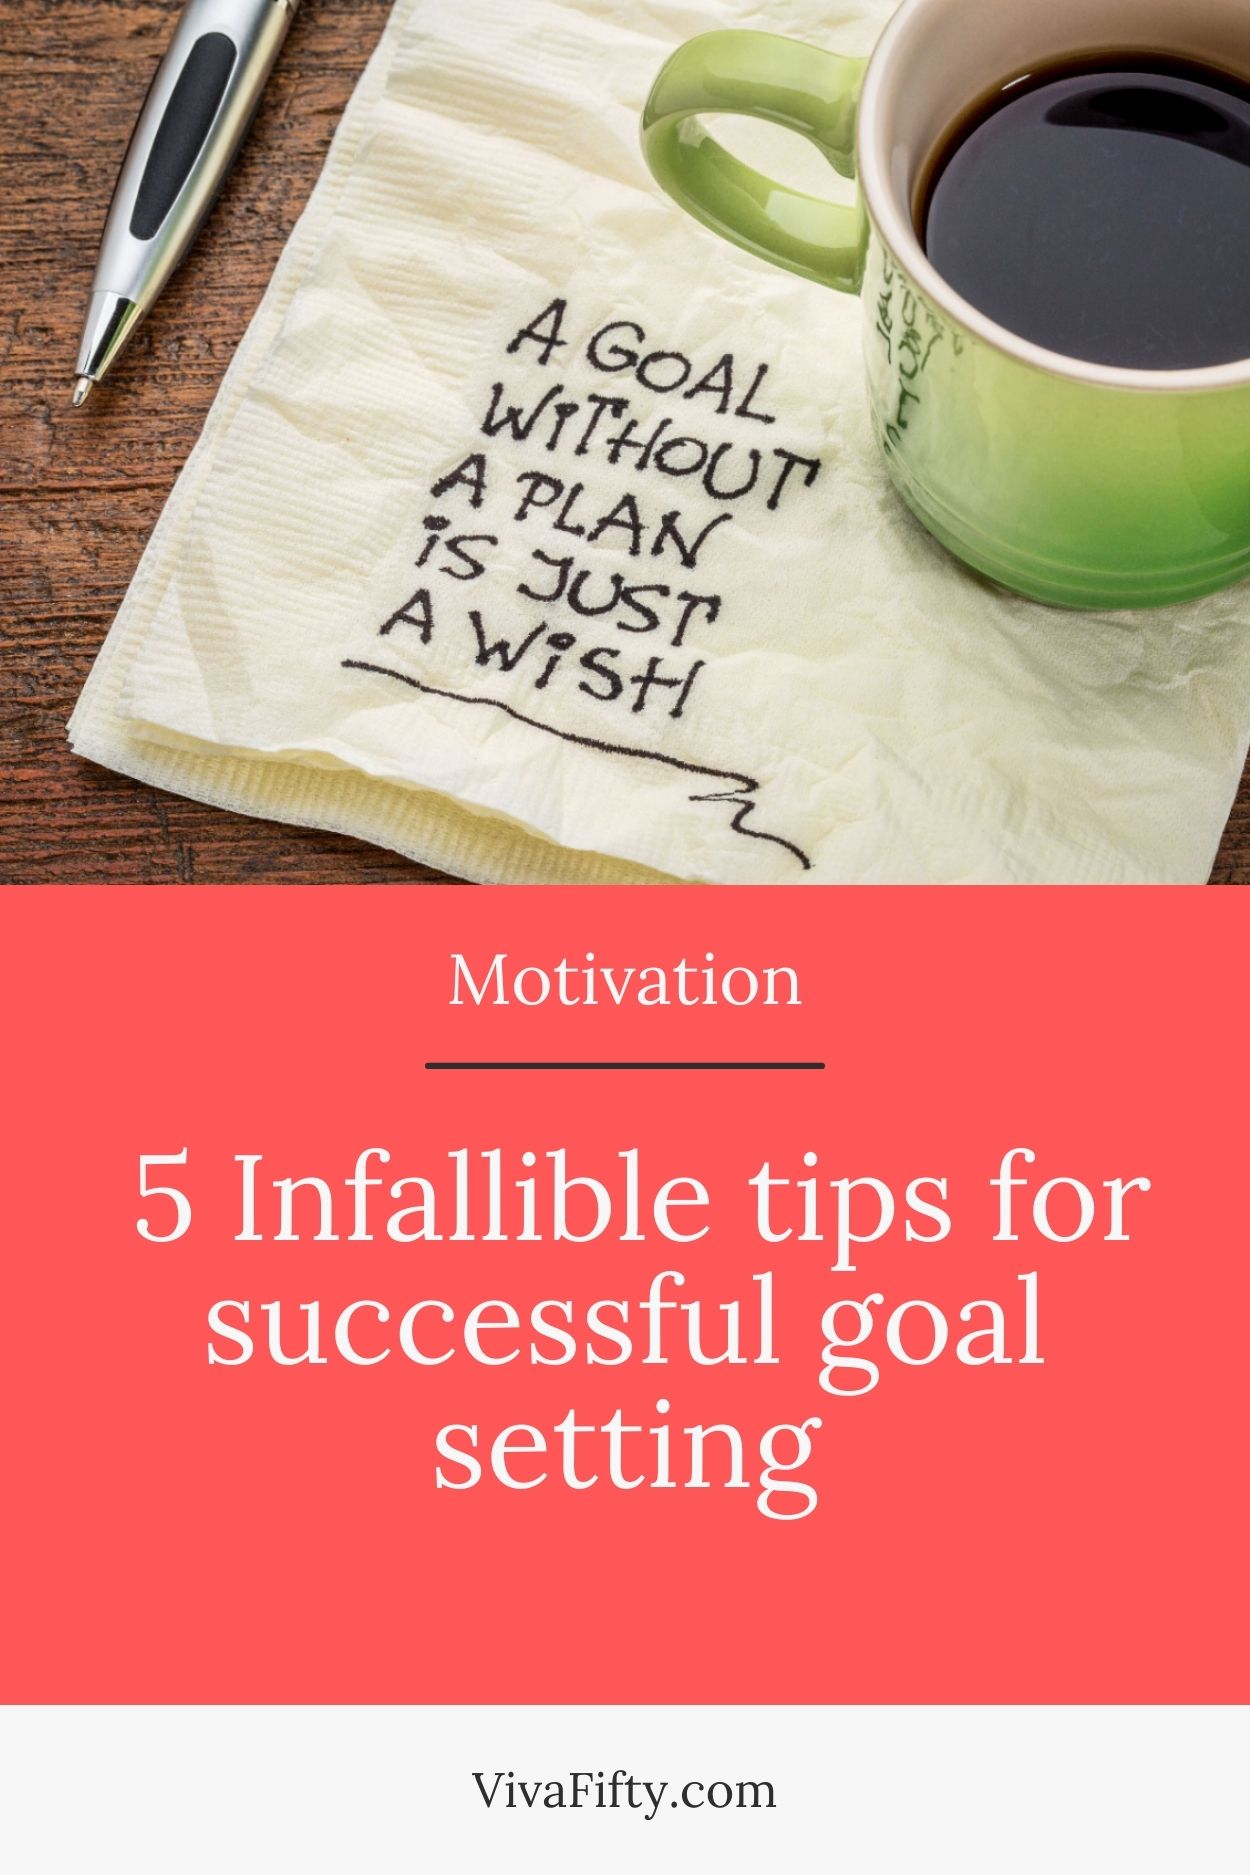 Goal setting for the new year can seem daunting. But with this checklist you will breeze through it before the clock strikes twelve.